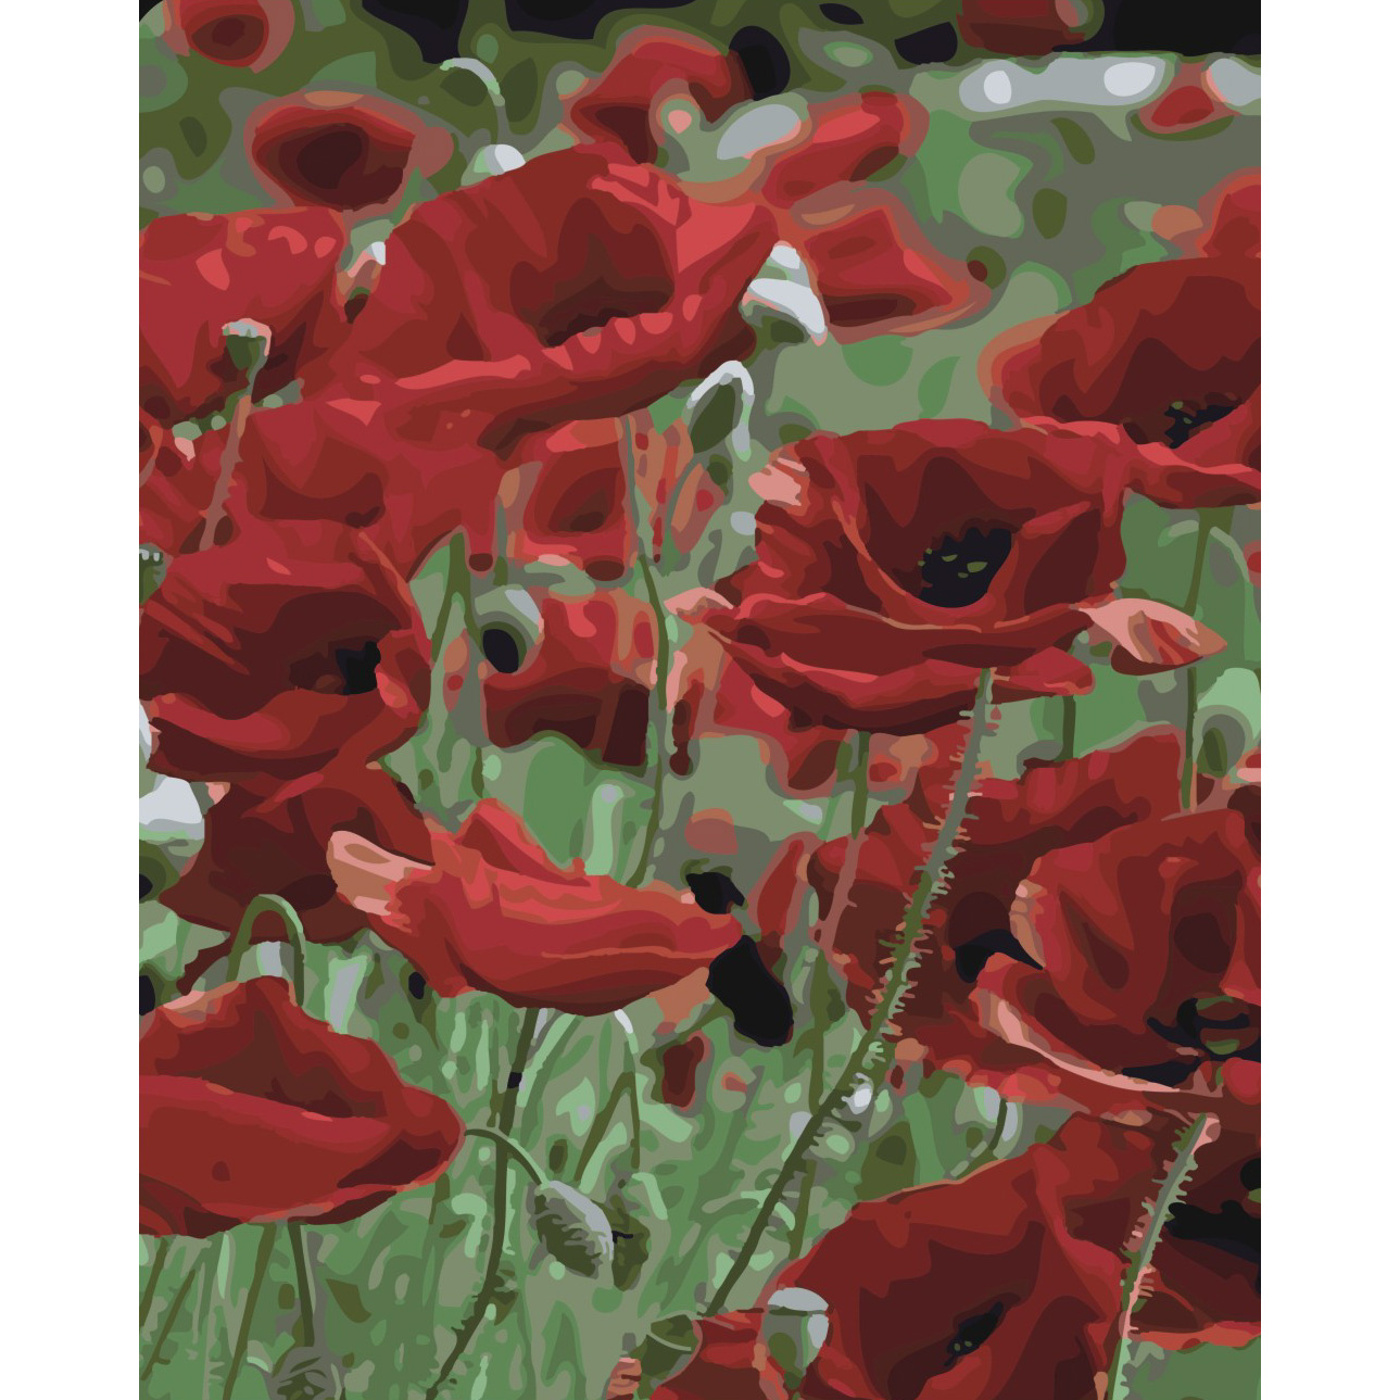 Set for painting by numbers SY6510 "Poppy field", size 40x50 cm